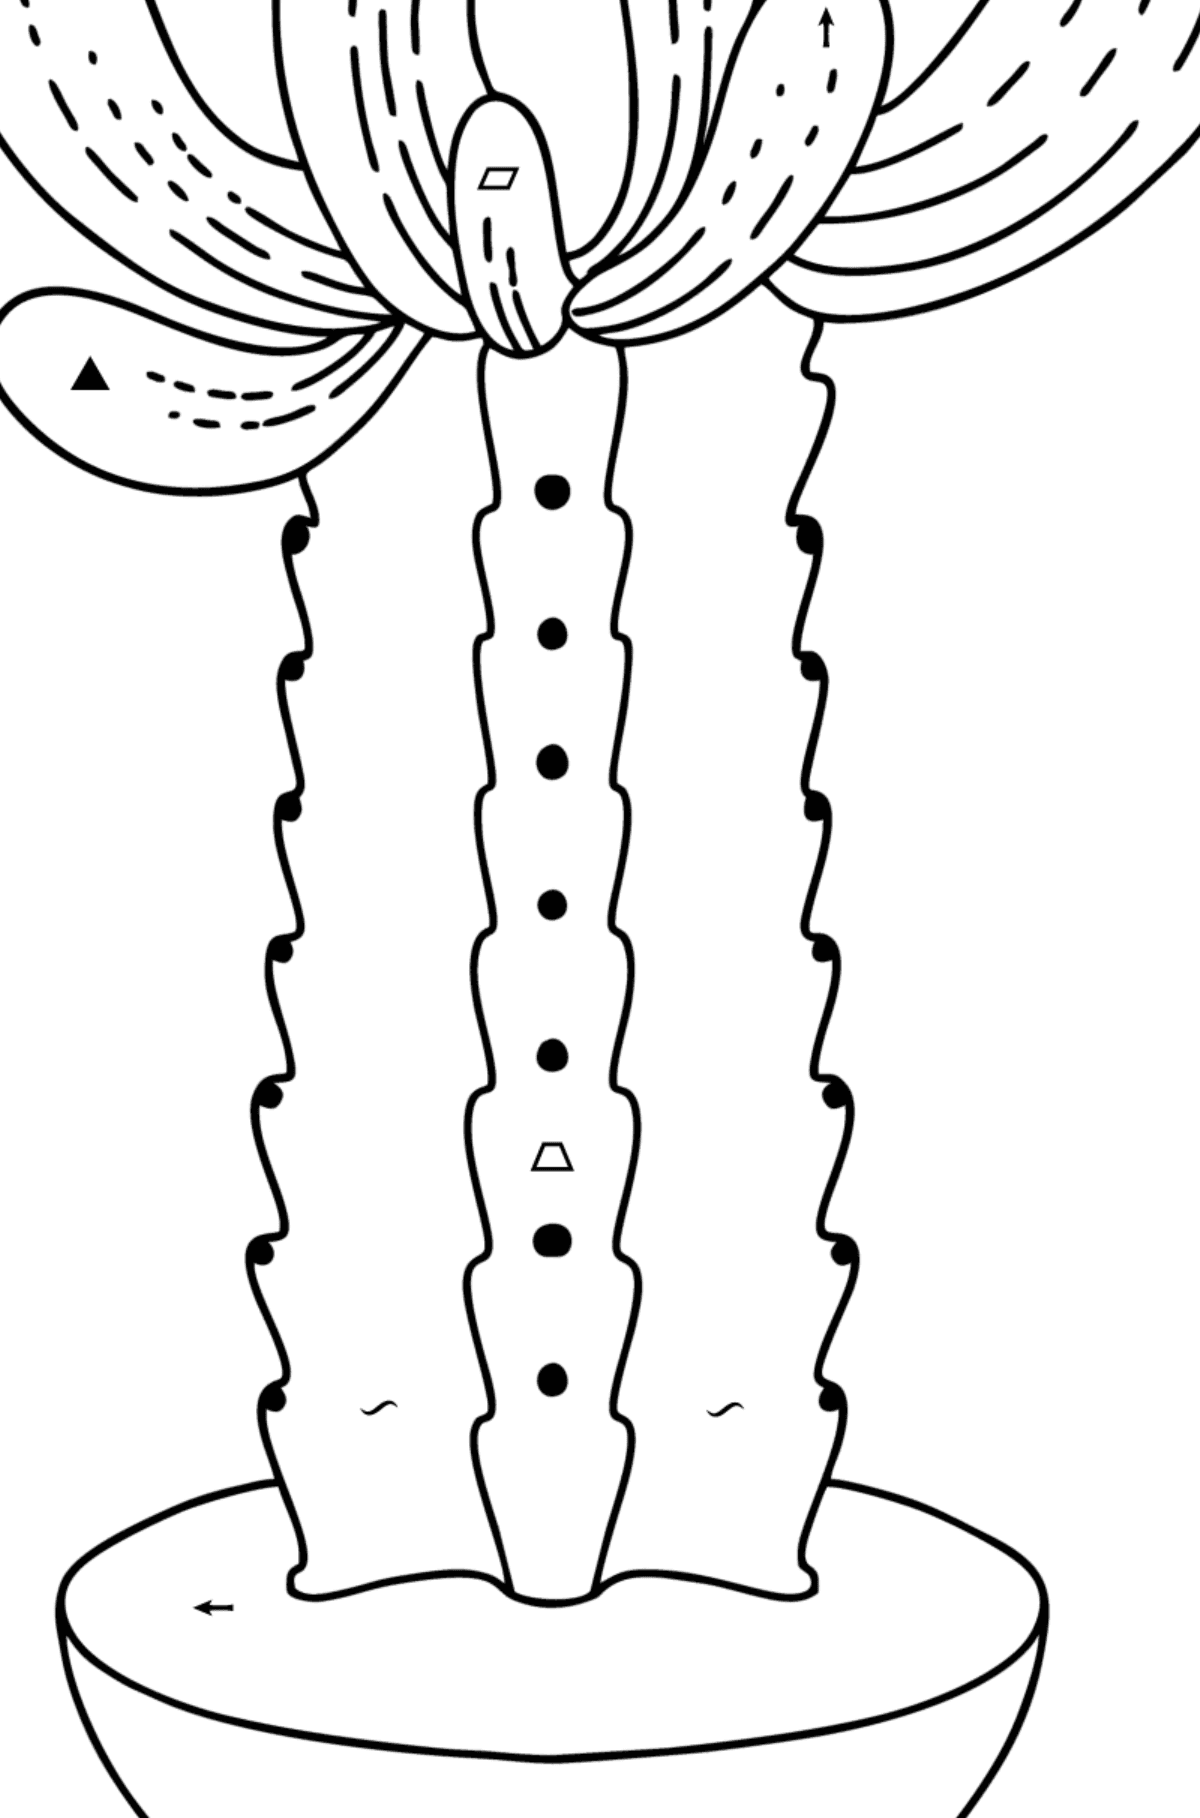 Simple cactus coloring page - Coloring by Symbols and Geometric Shapes for Kids